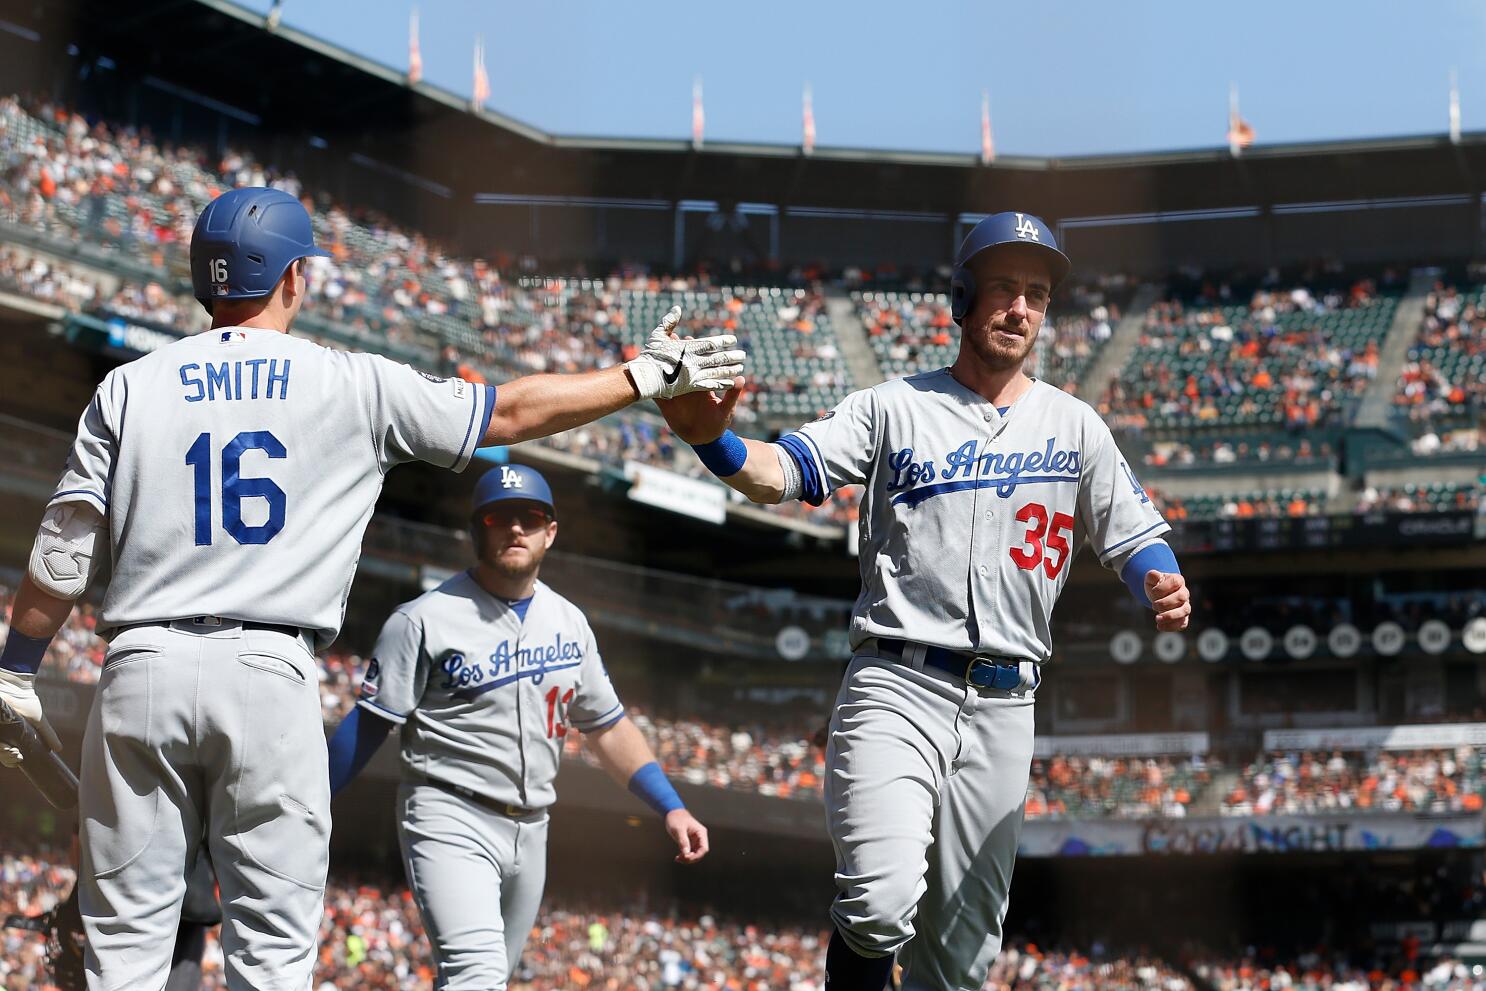 Cody Bellinger arbitration: What will the Dodgers All-Star make in